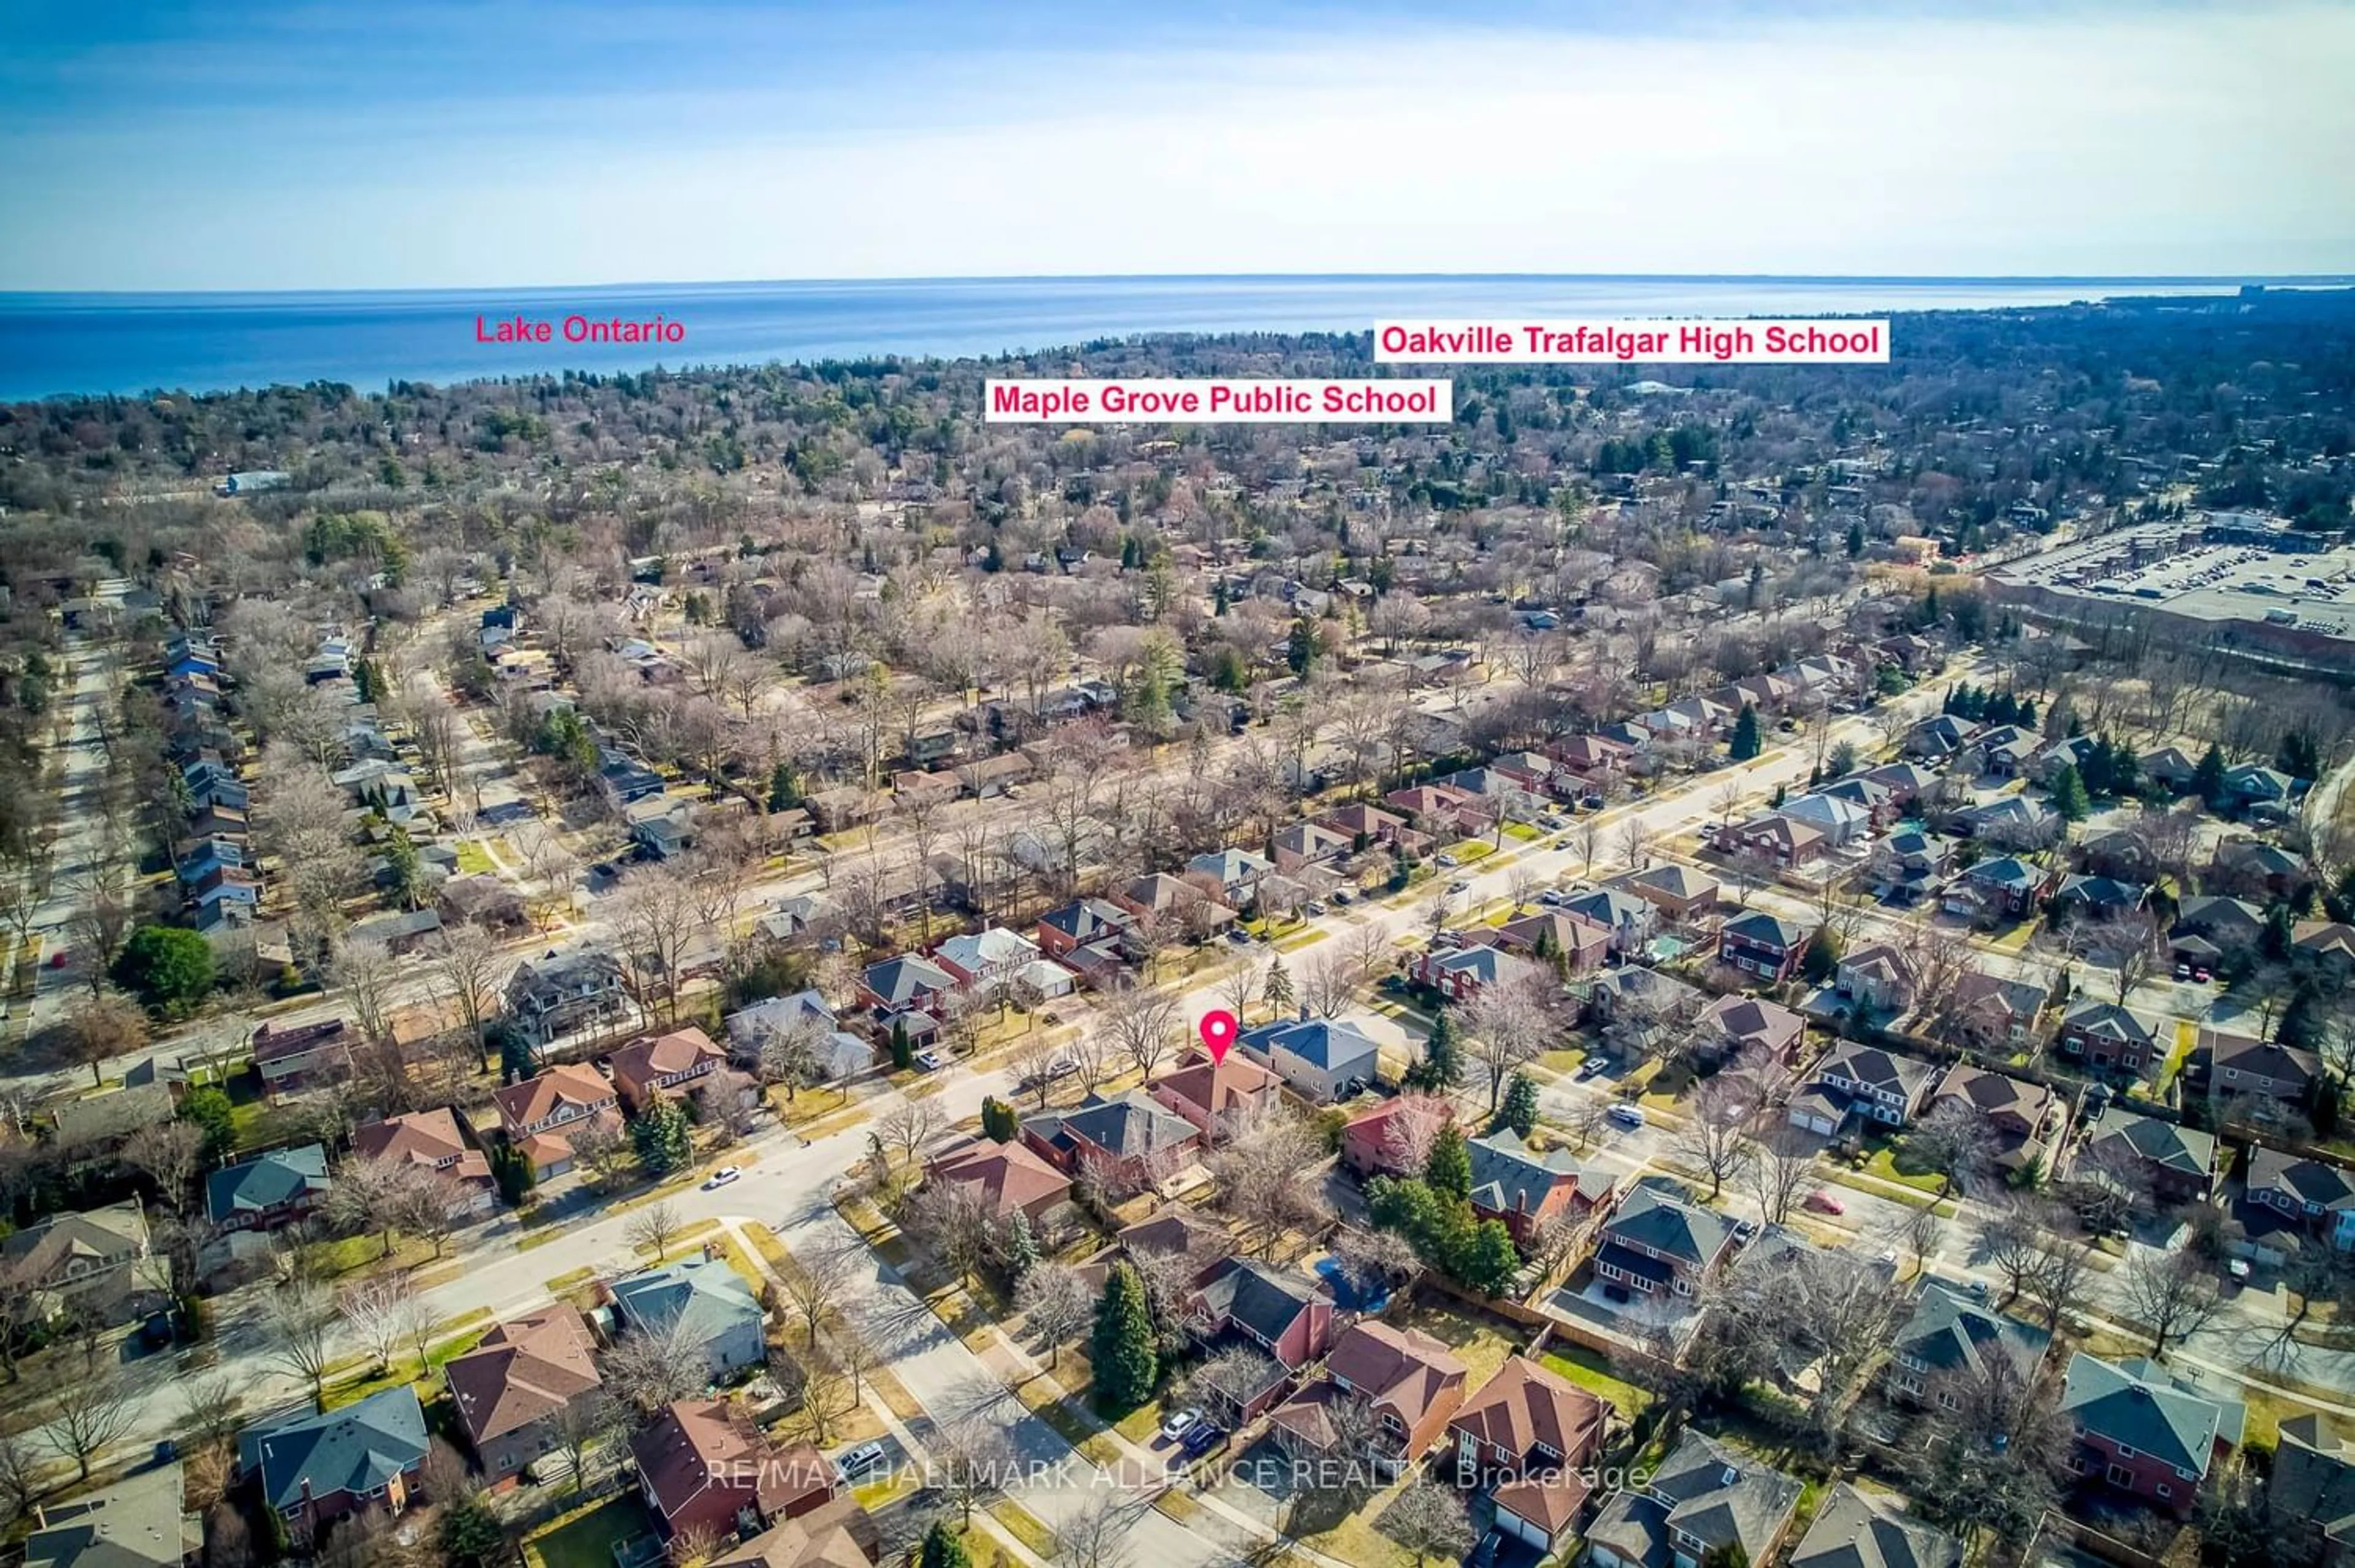 Lakeview for 2171 Dunvegan Ave, Oakville Ontario L6J 6N5